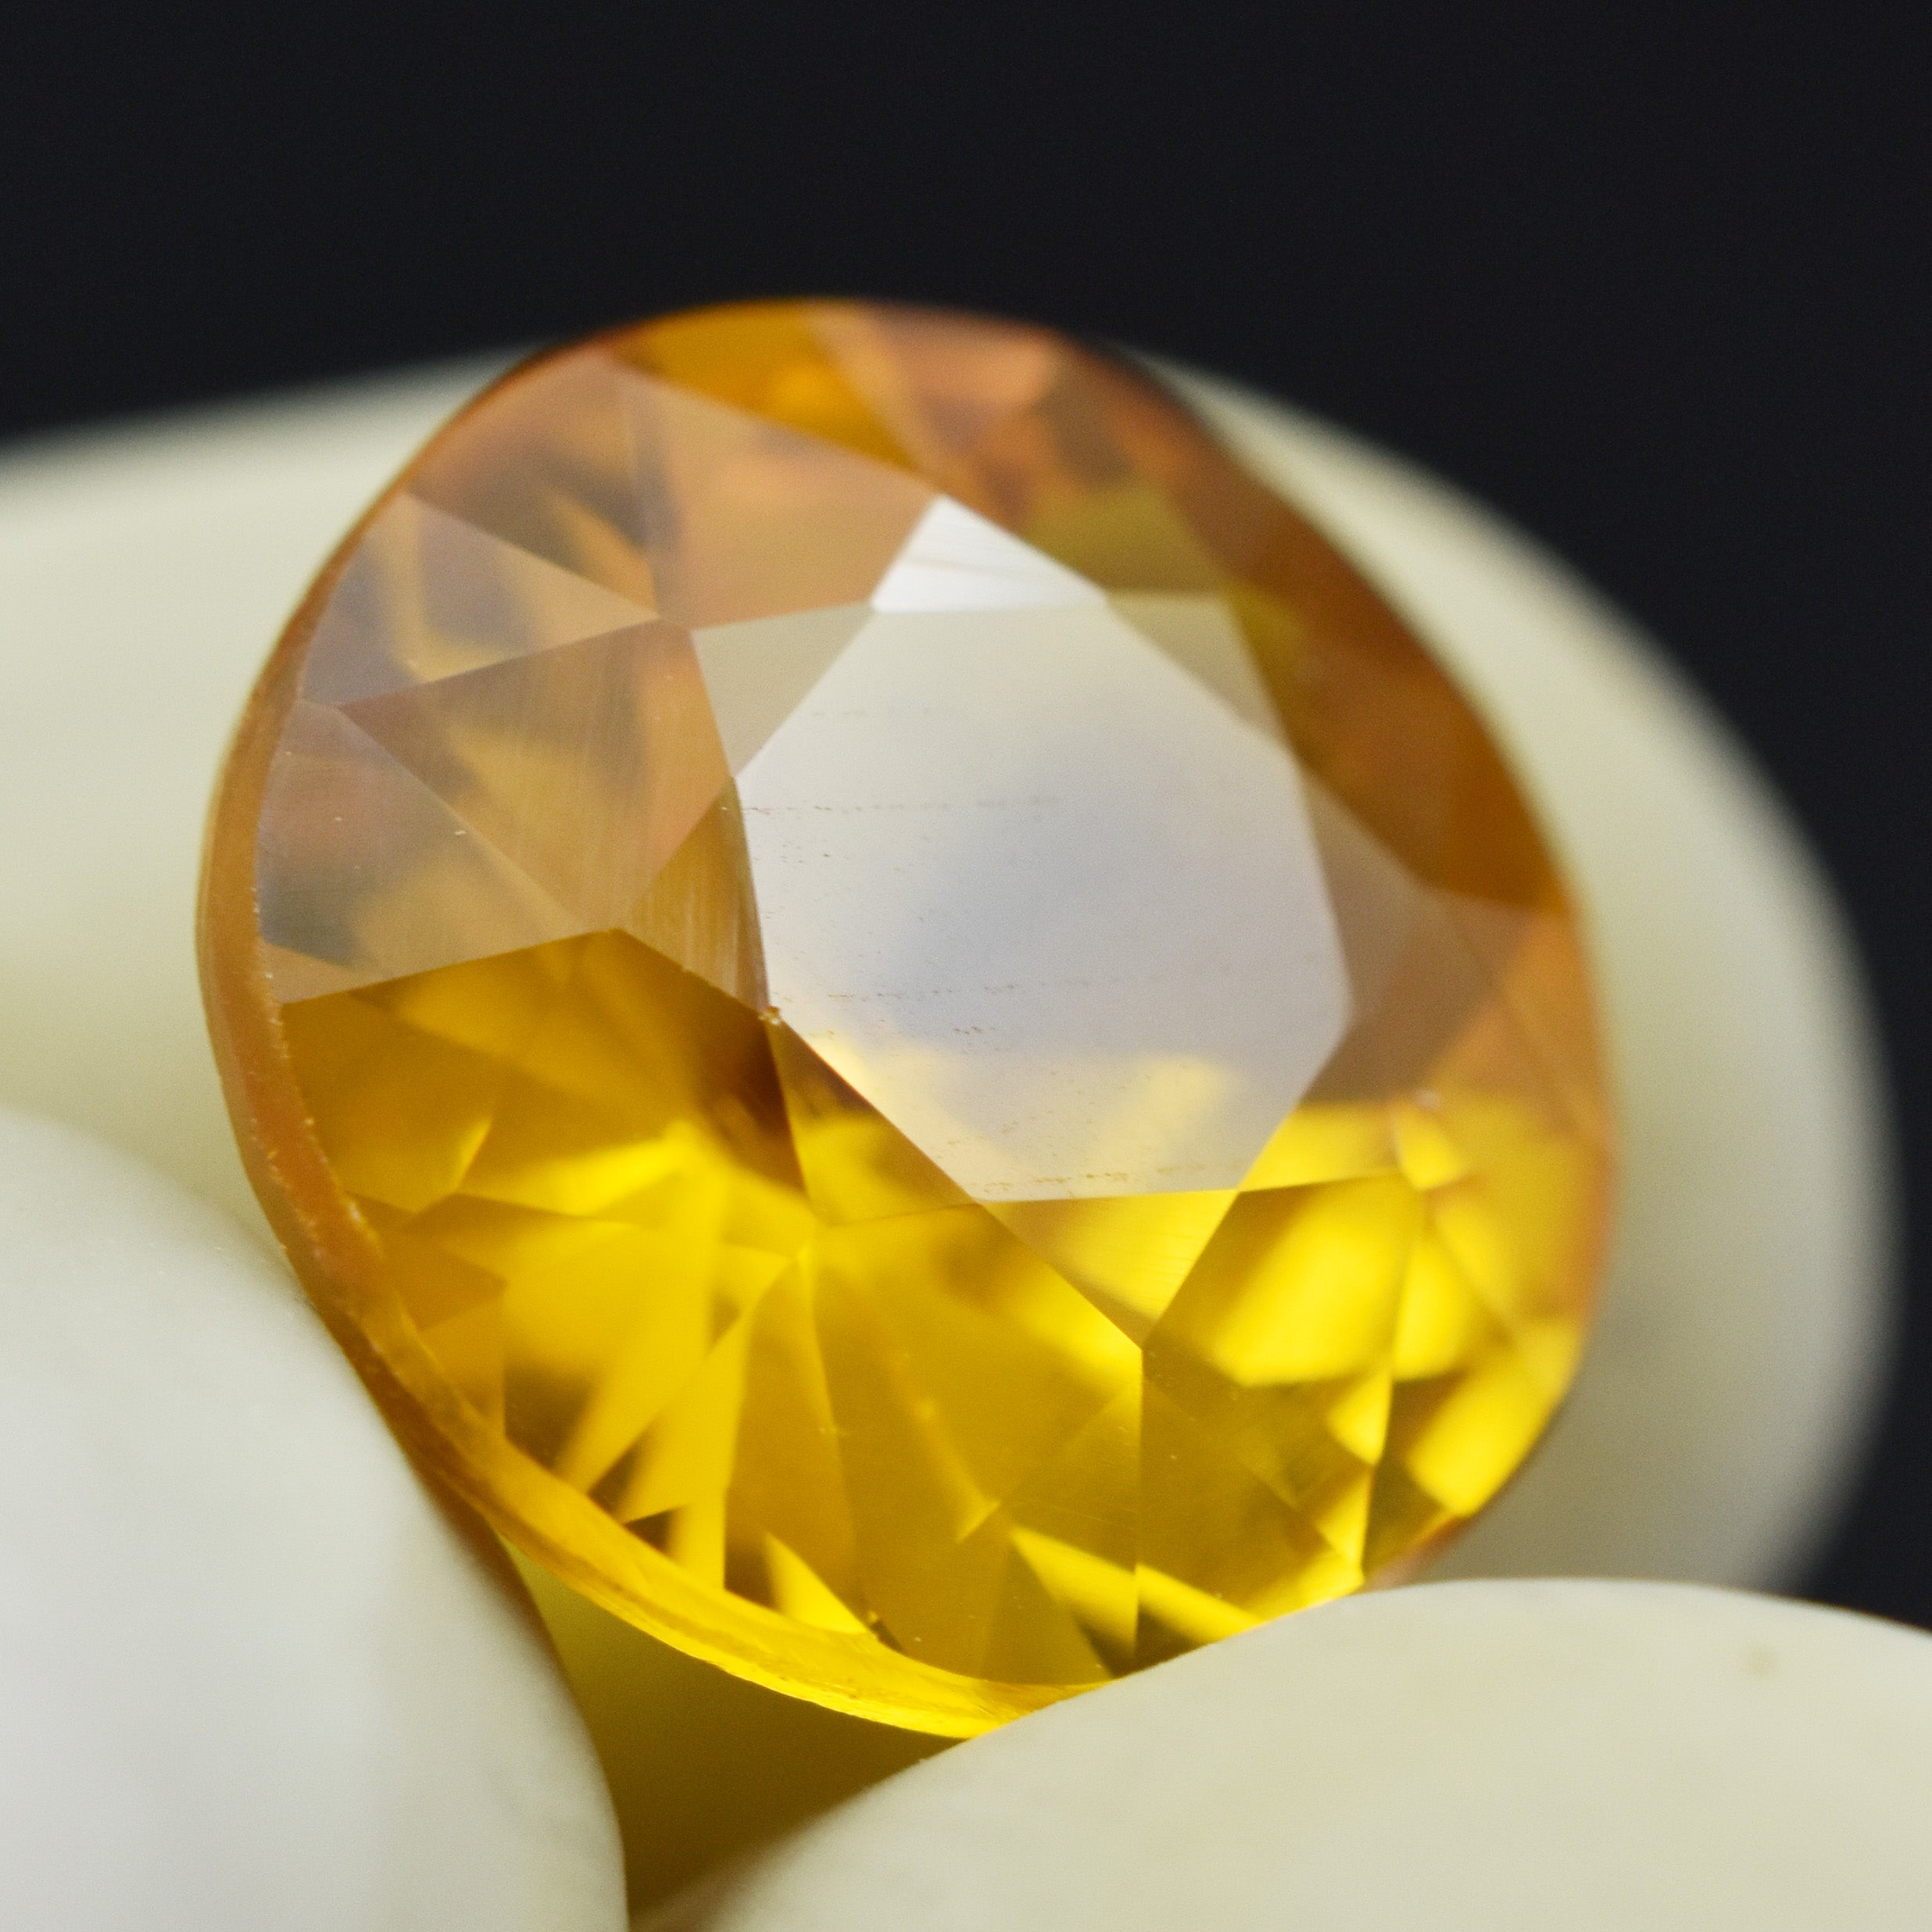 Sapphire Gem Jewelry 6.15 Carat Yellow Sapphire Round Cut Natural Certified Loose Gemstone Best For Good Fortune and Prosperity